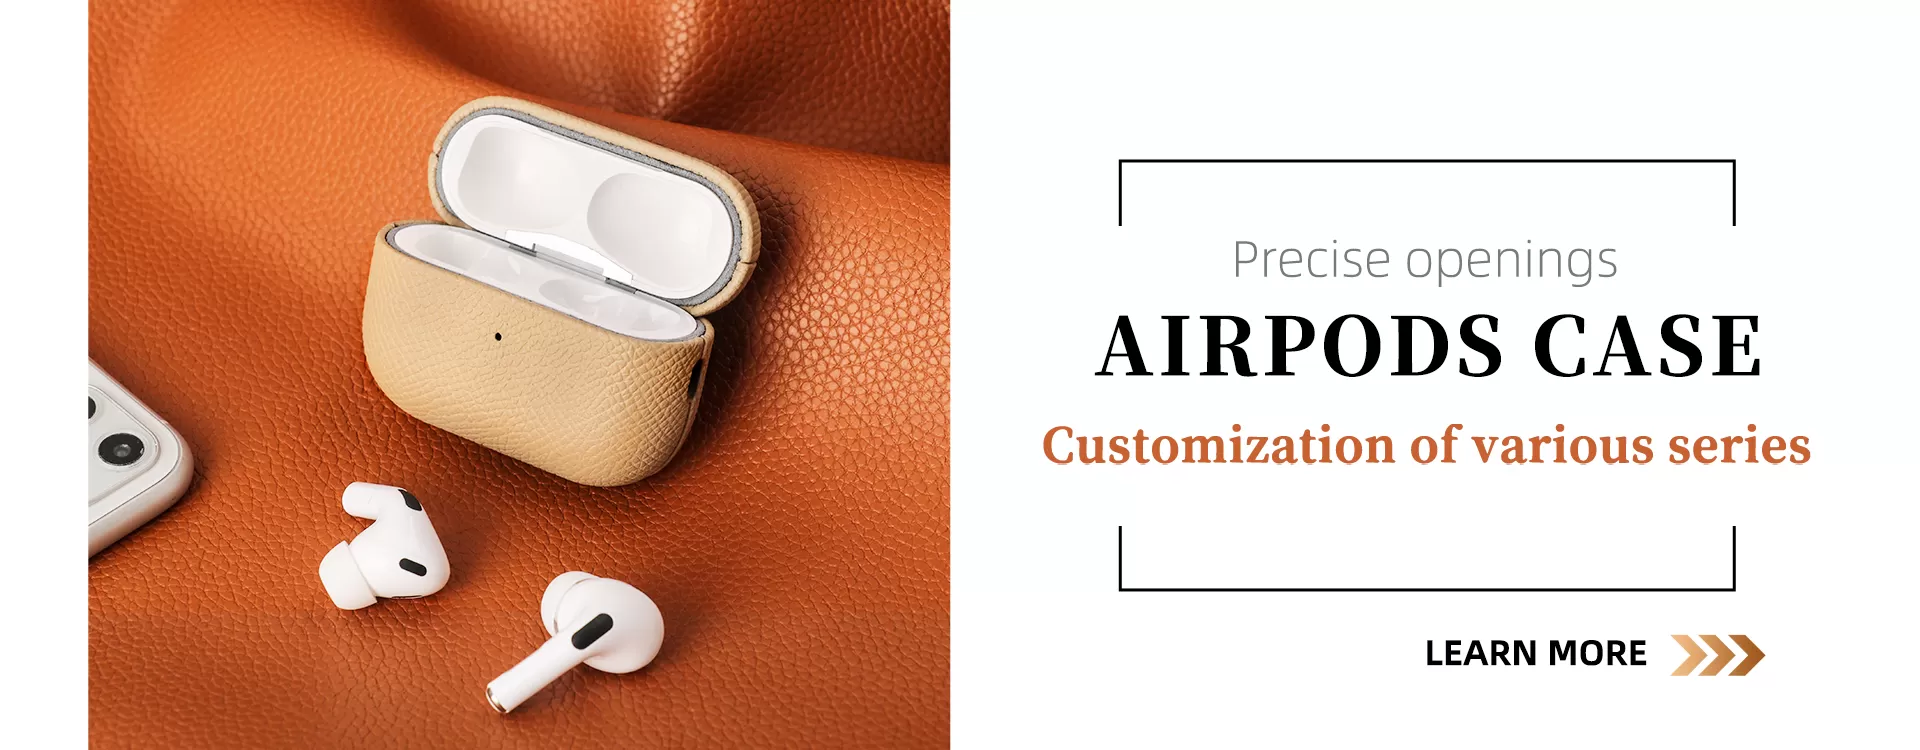 Case for Airpod / Ipad